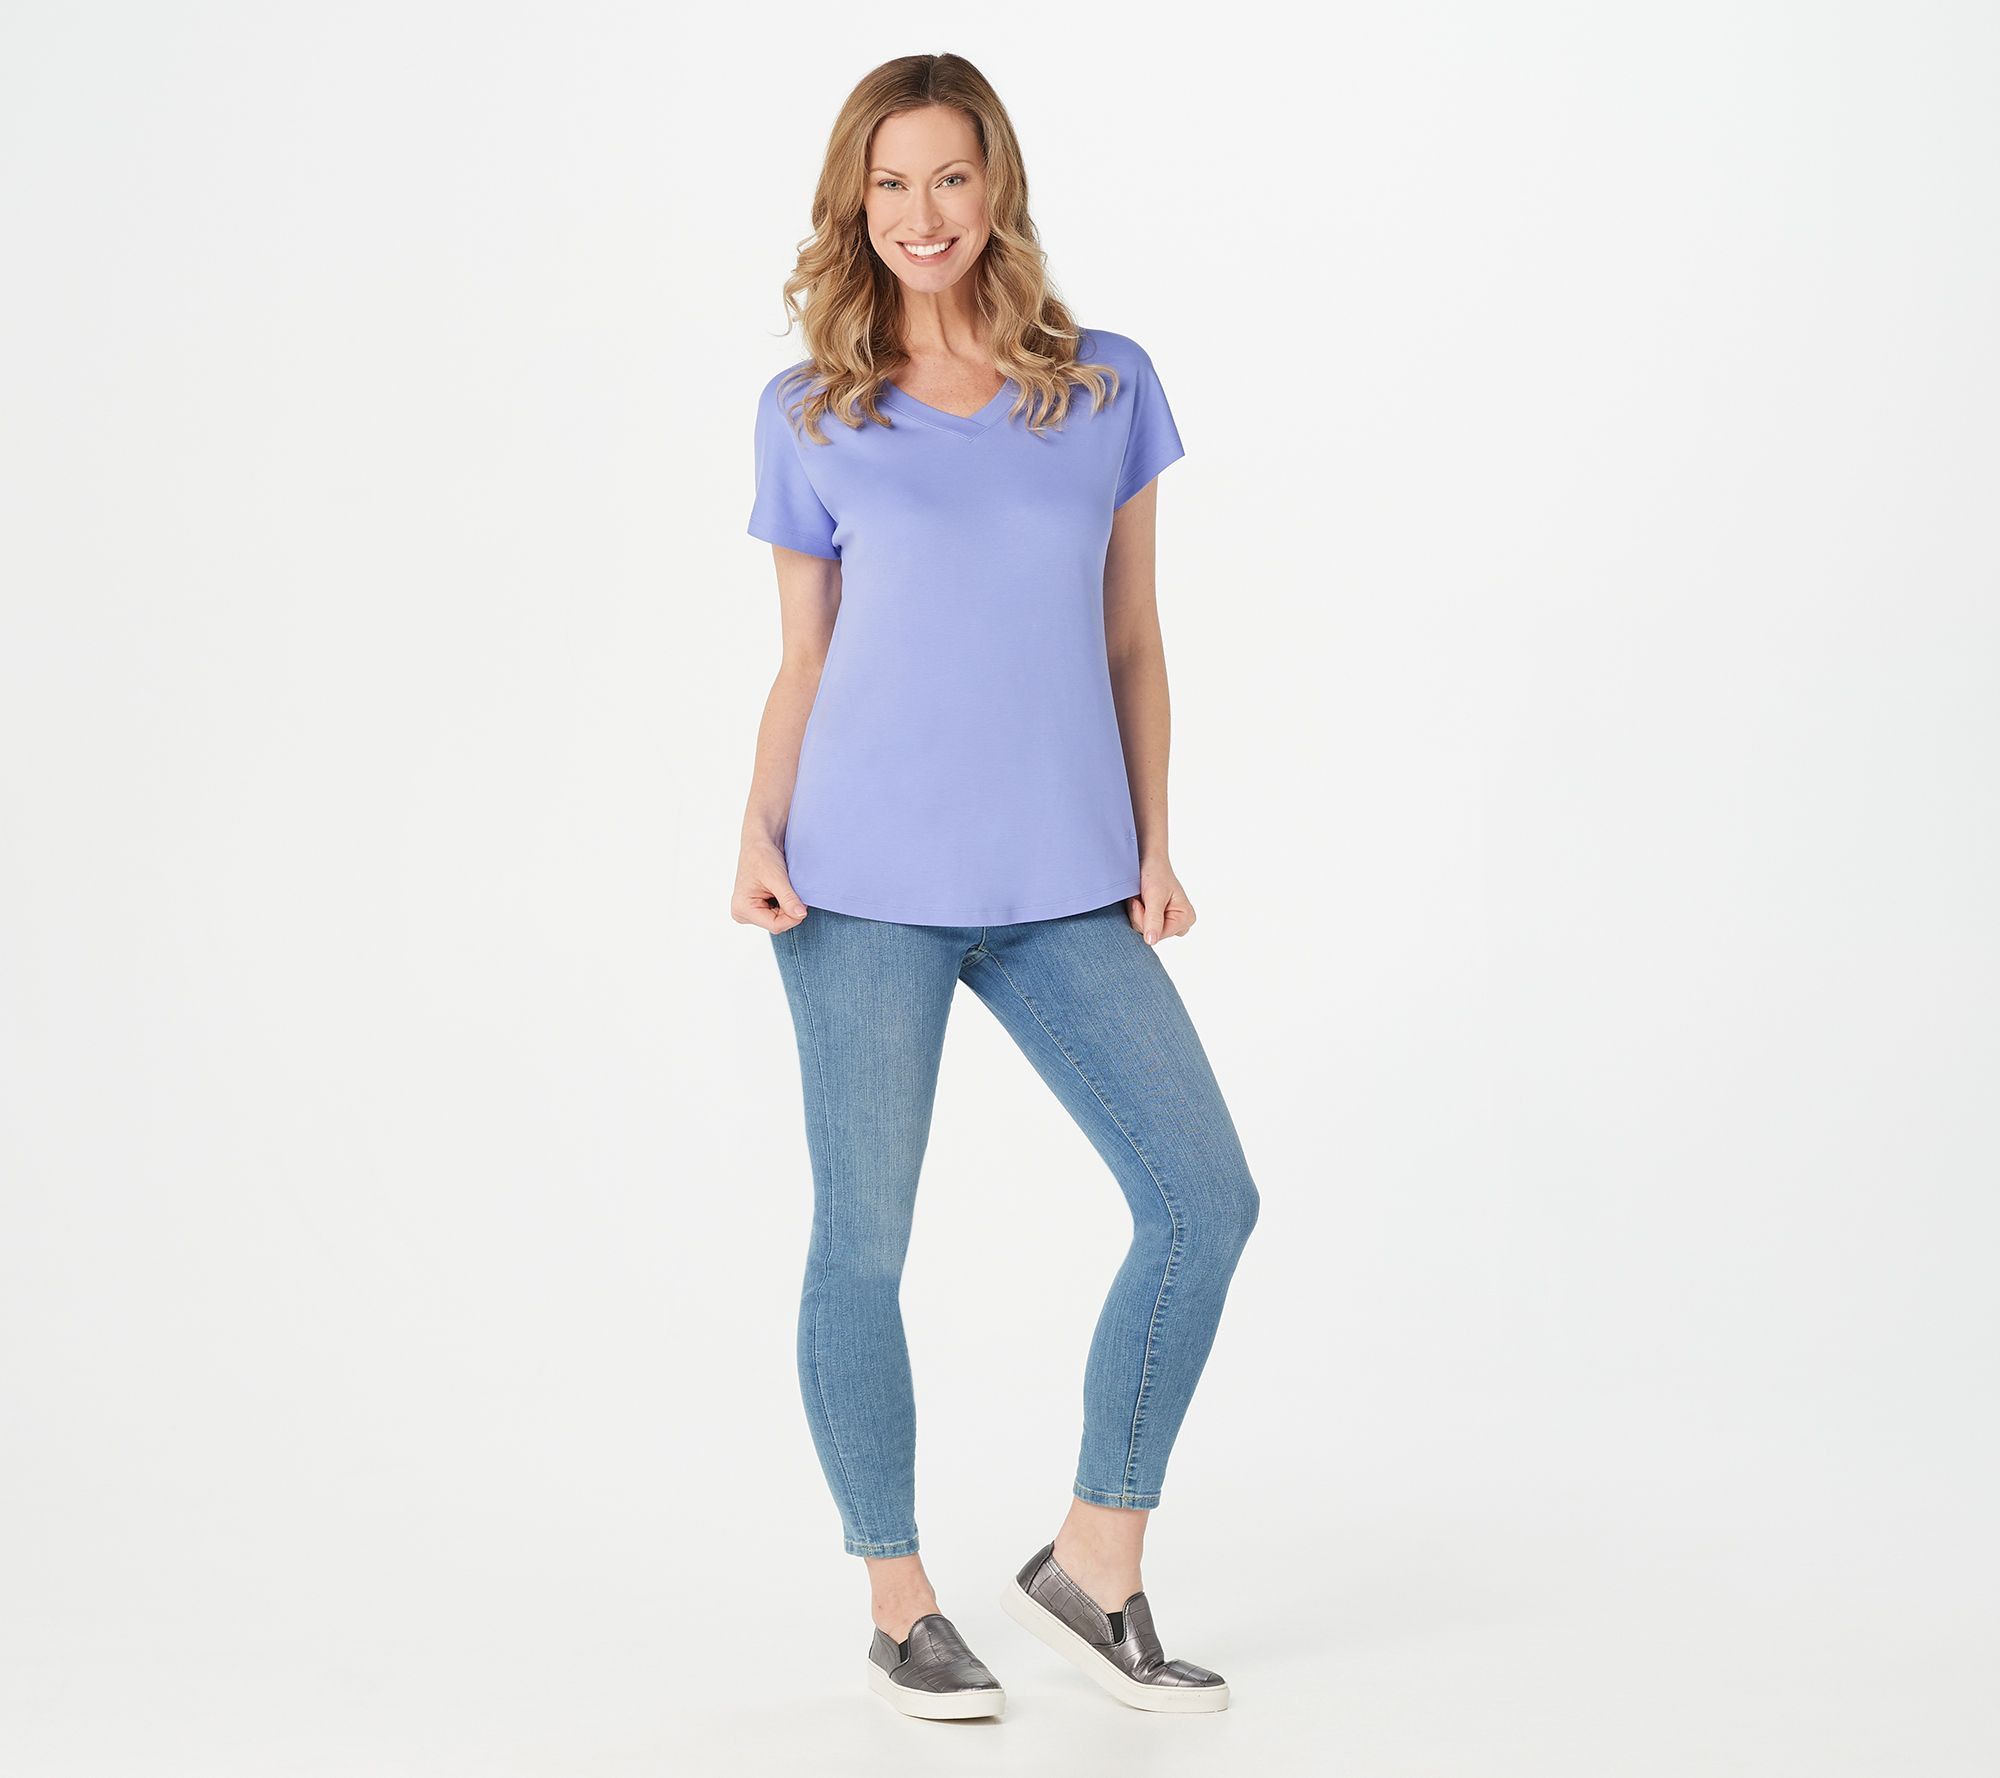 V Neck Solid Colour Half Sleeve T-Shirts. – N A S H